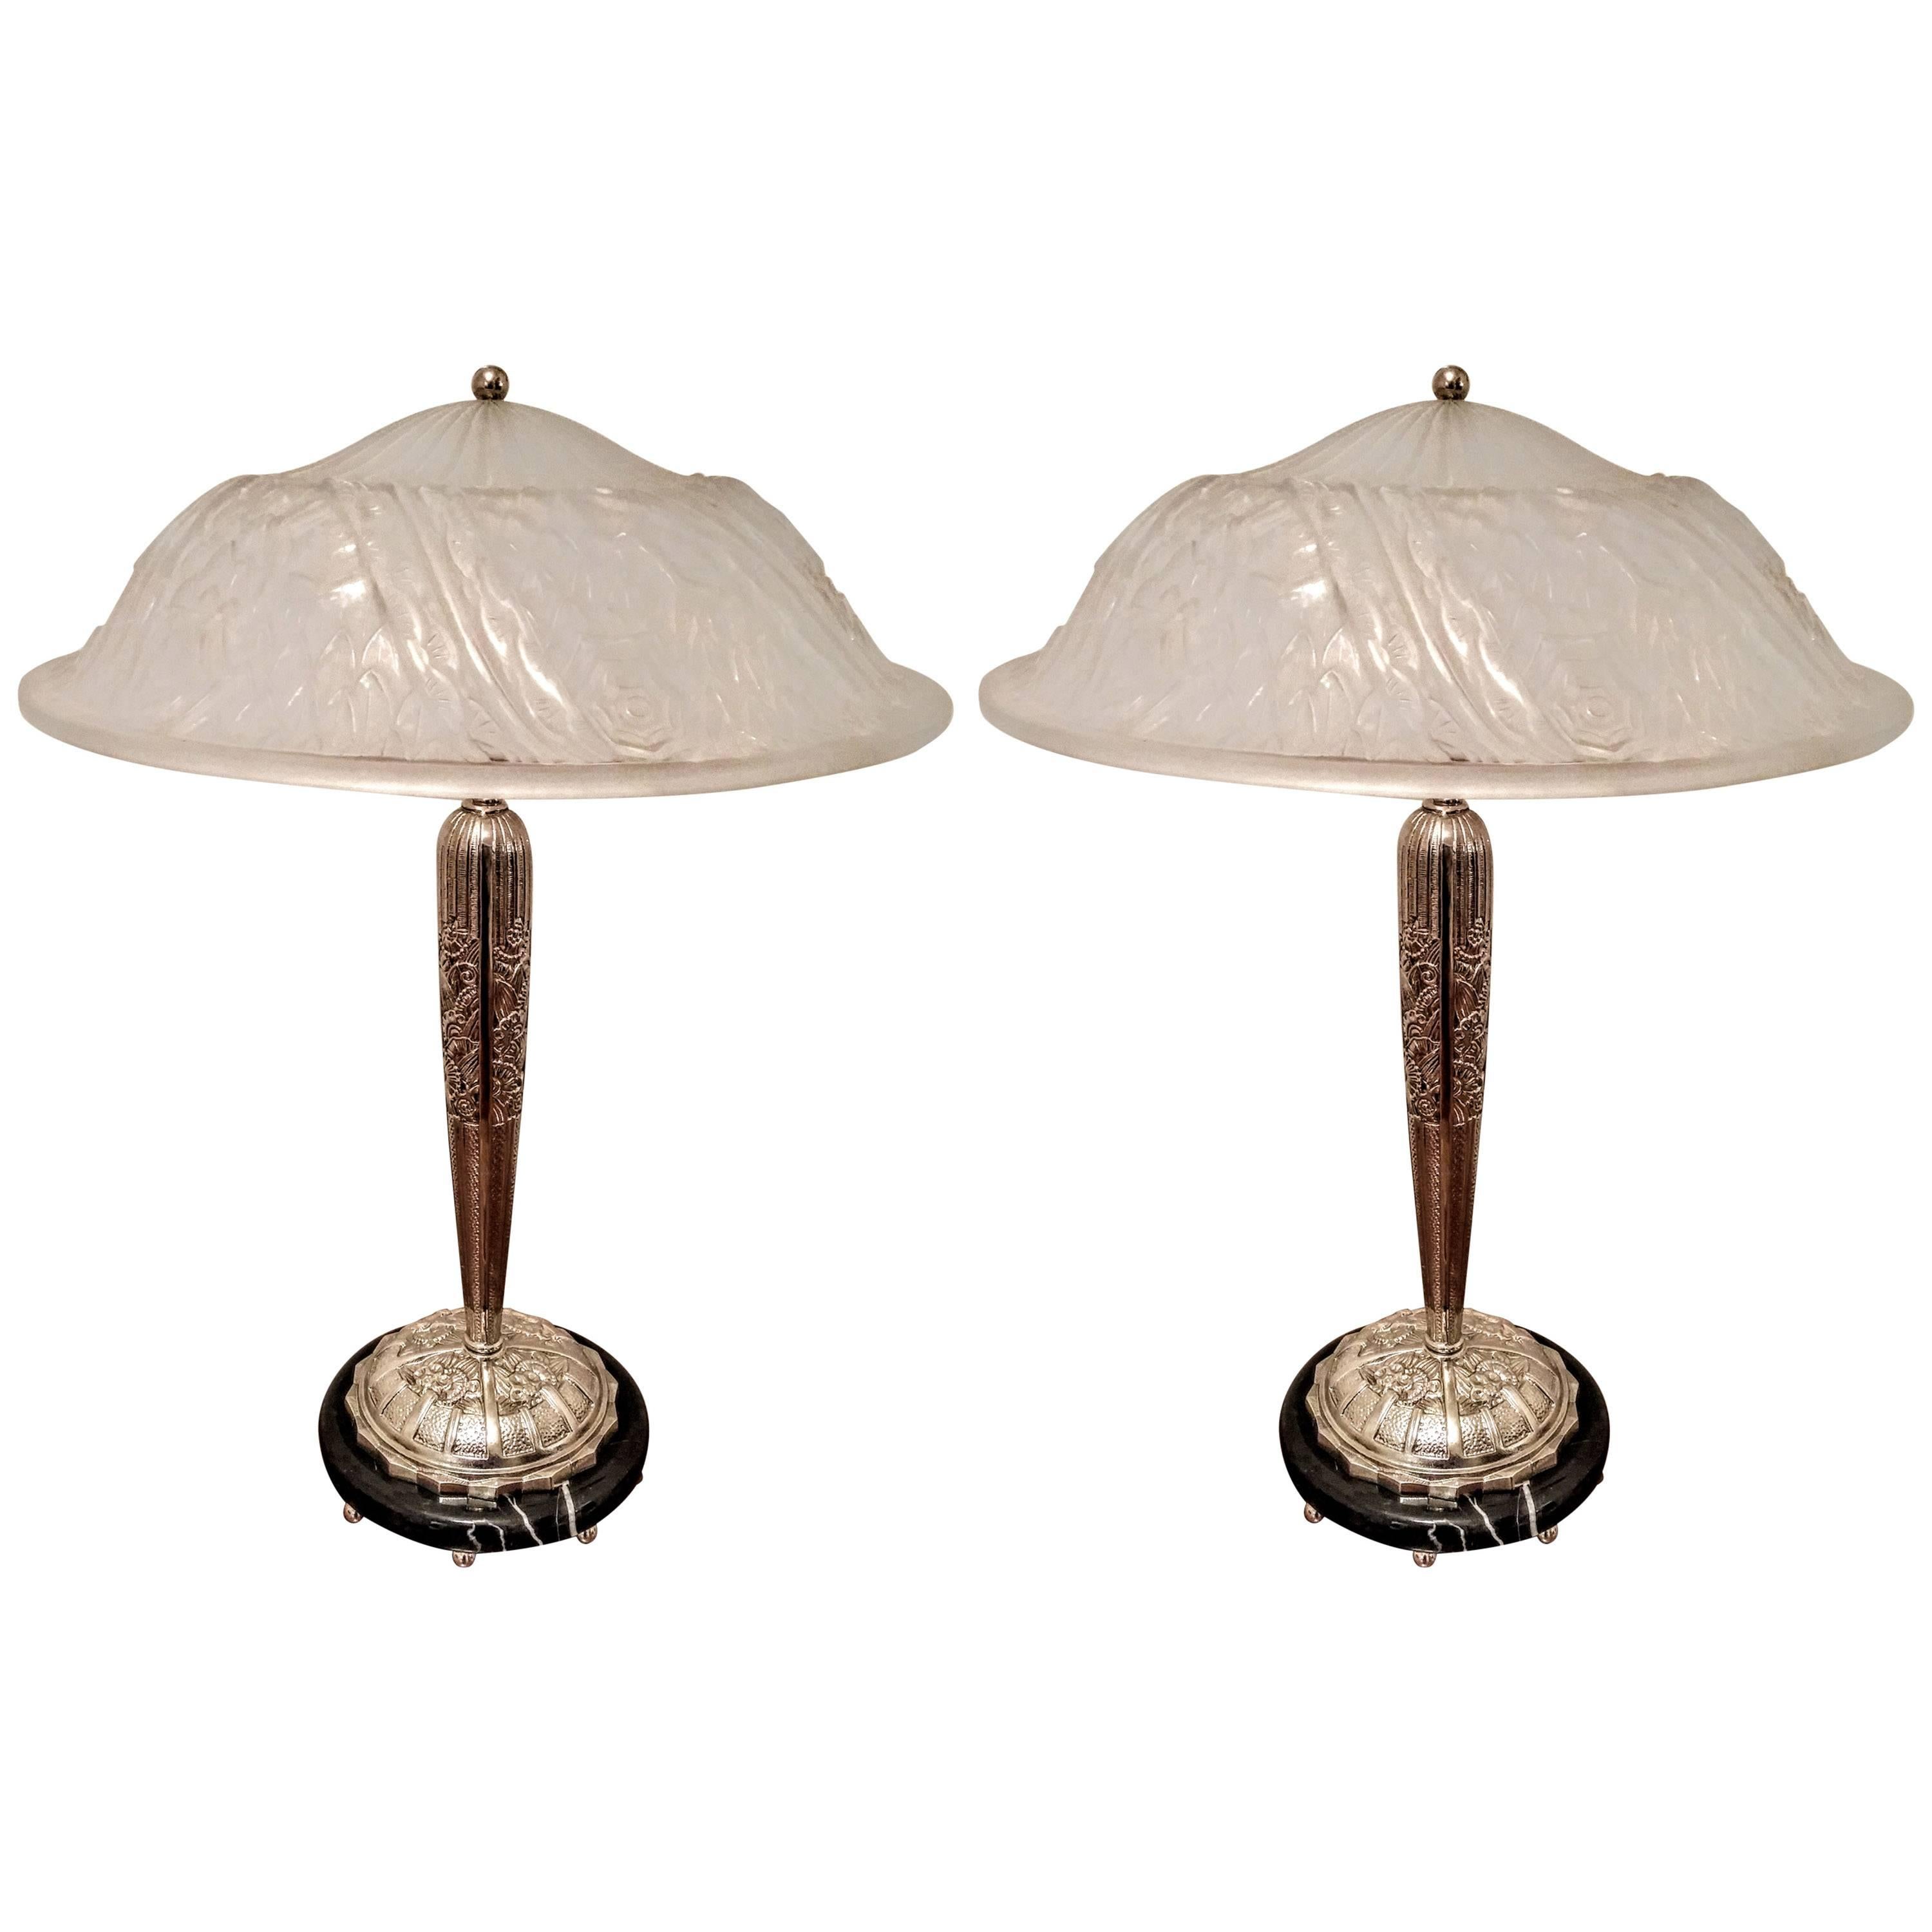 Pair of French Art Deco Table Lamps by Schneider